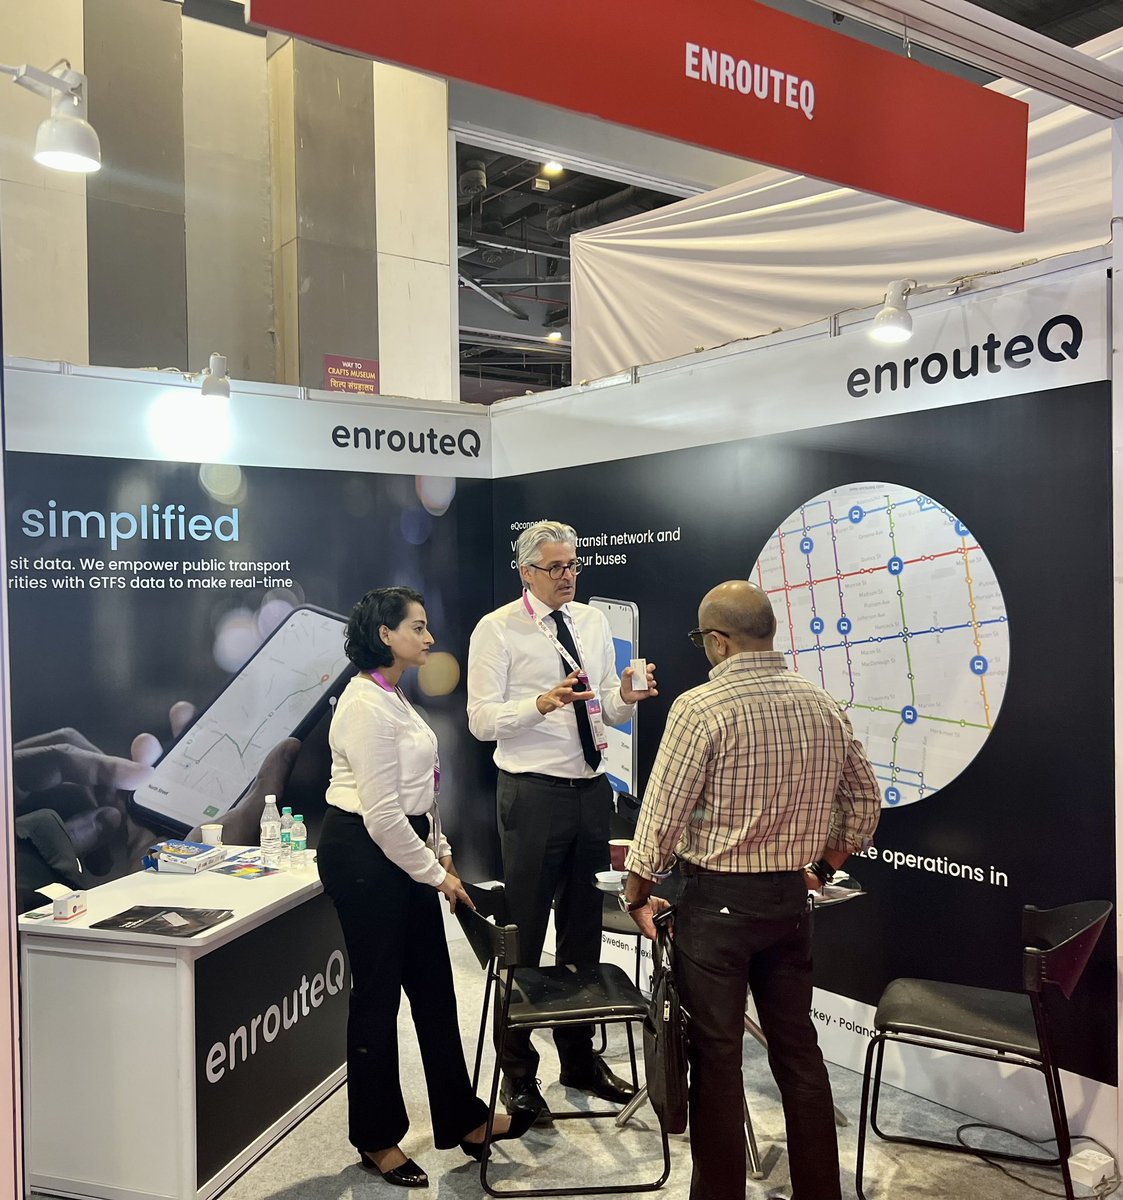 That's a wrap! Thanks to everyone who visited us at Smart Cities India Expo this week! #smartcitiesIndia #gtfs #enrouteq